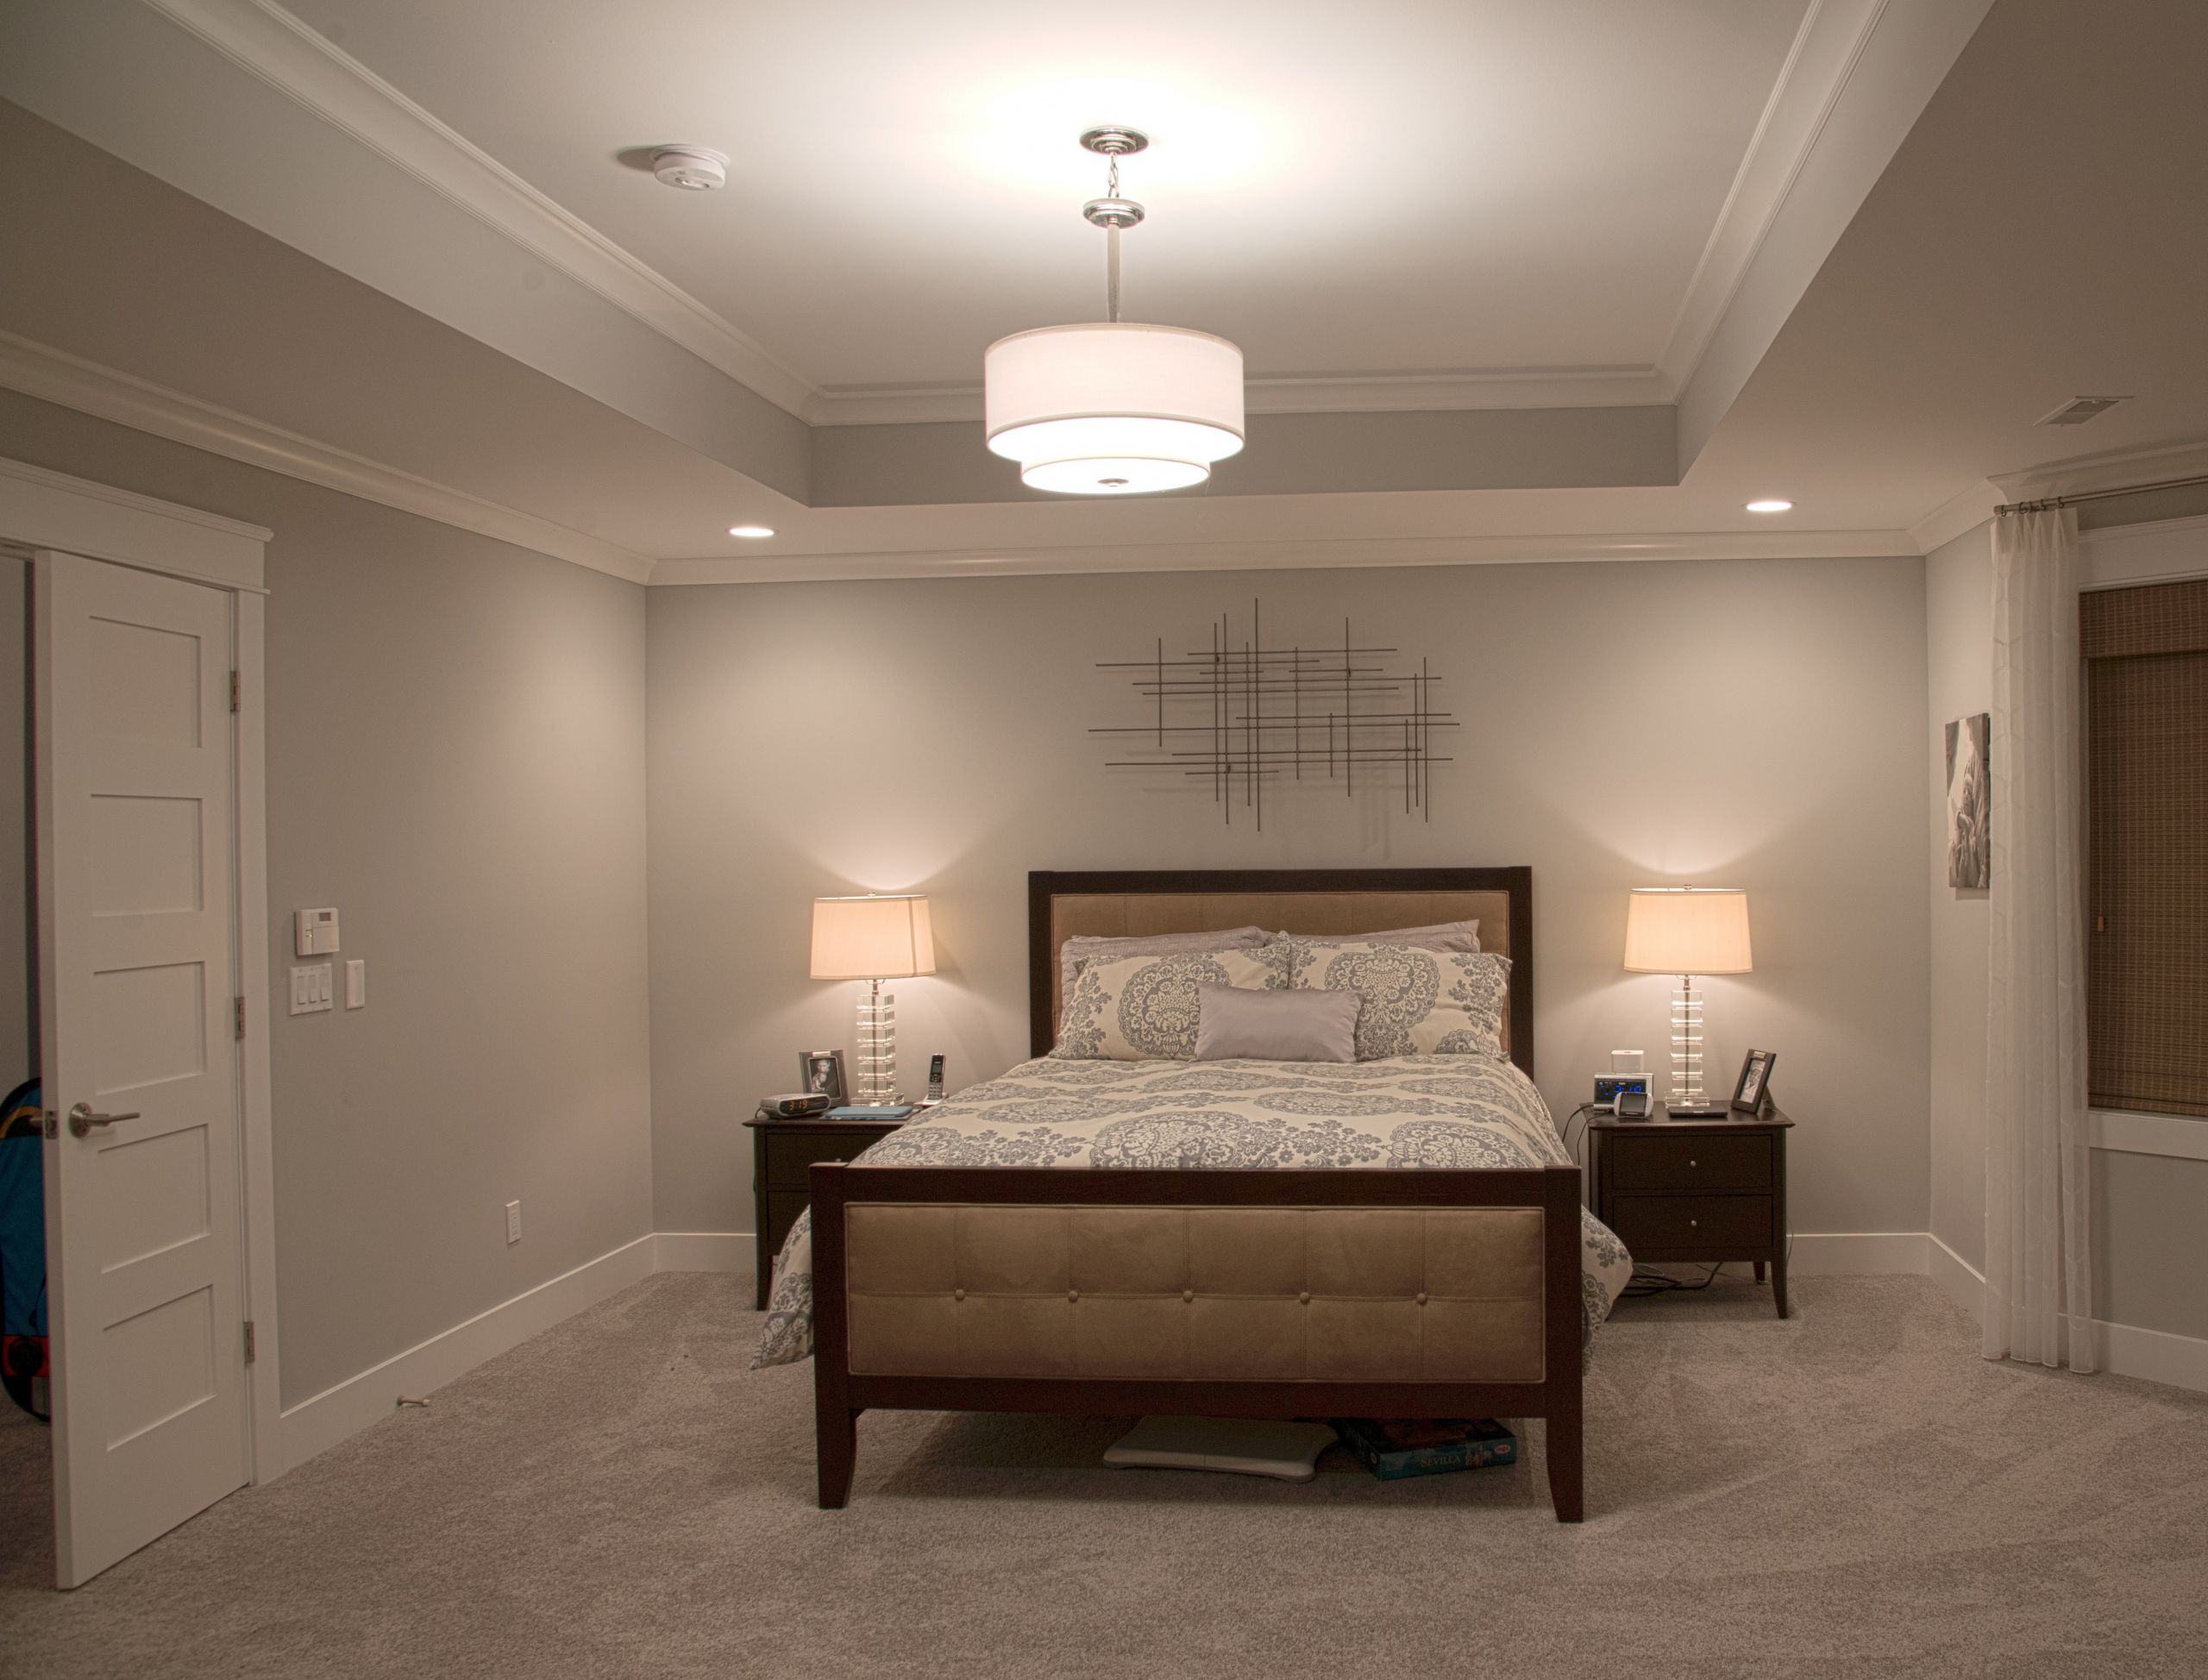 Master Bedroom Ceiling Light
 What s Your Design Style Gross Electric